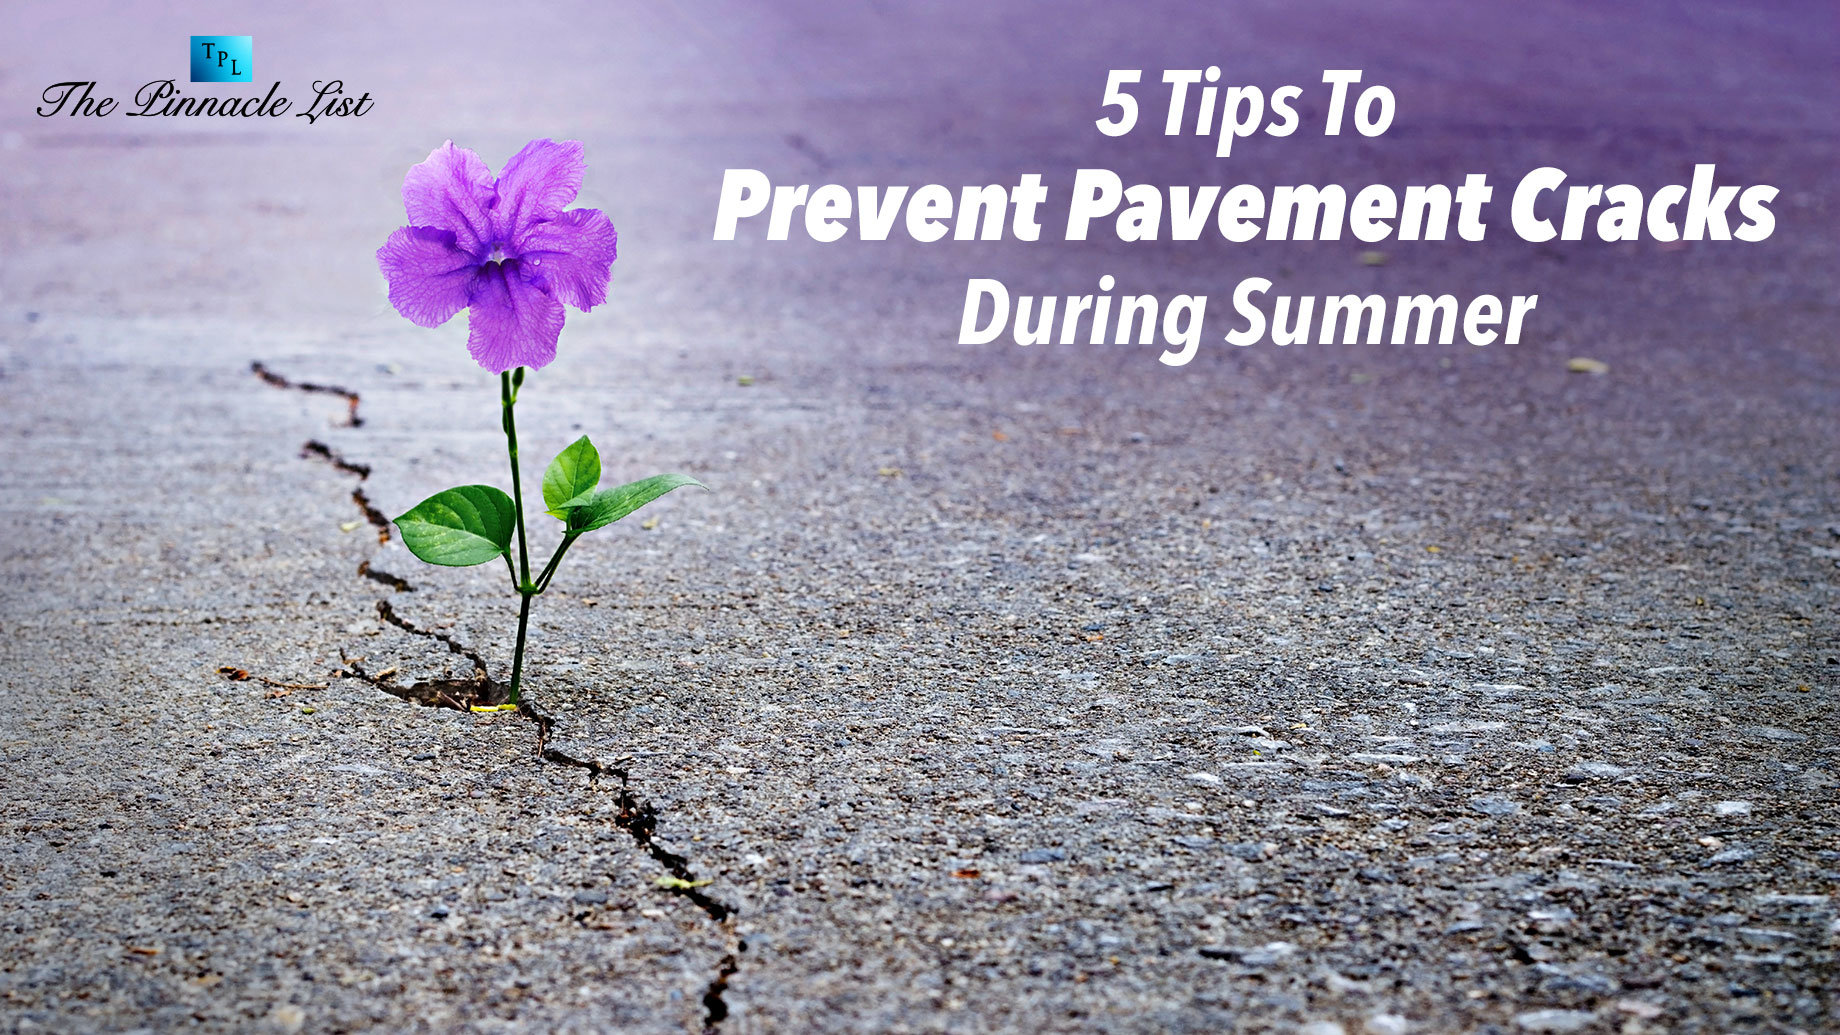 5 Tips To Prevent Pavement Cracks During Summer